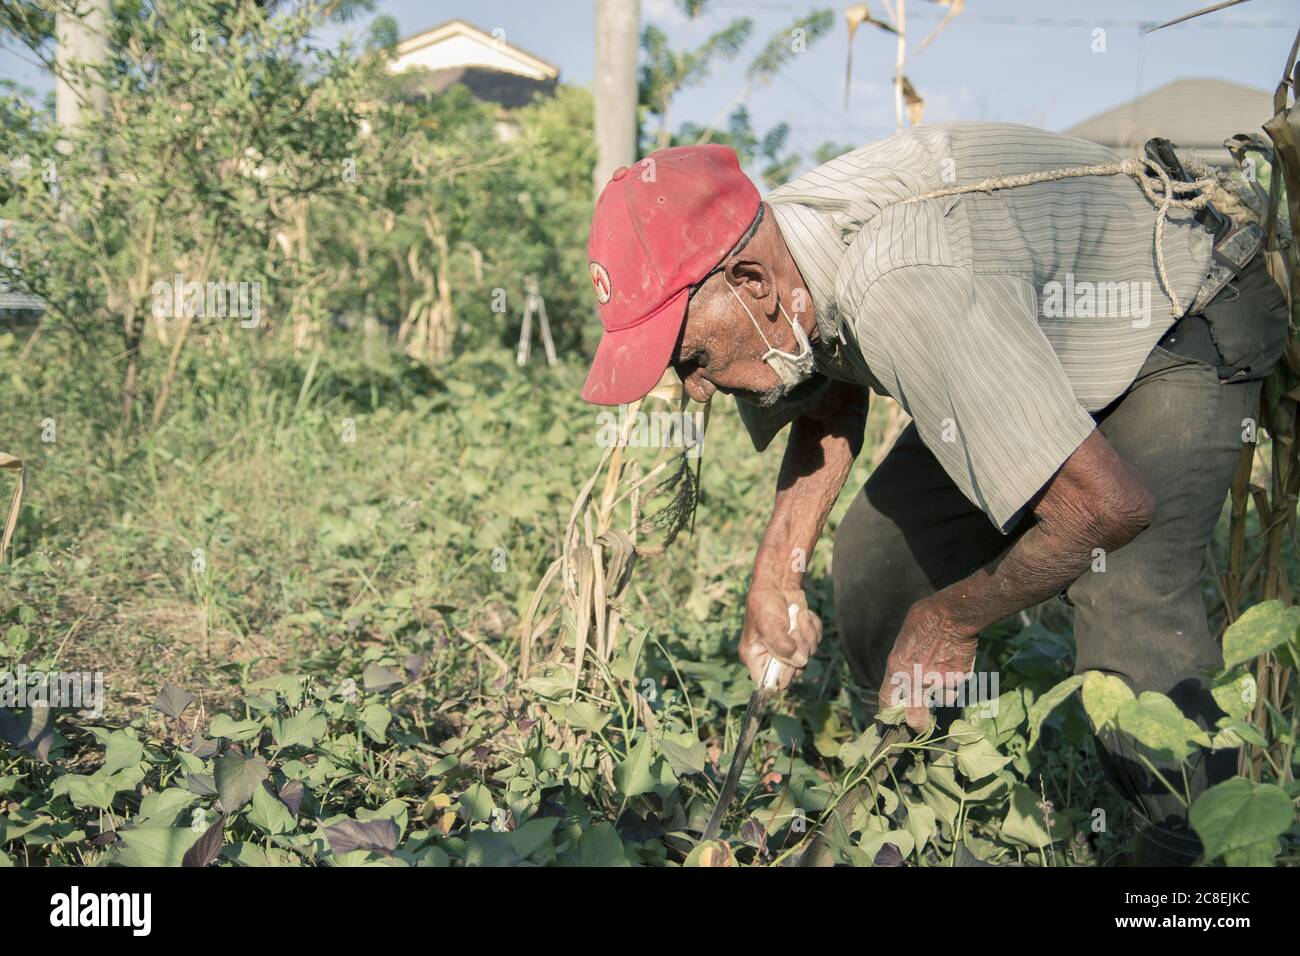 Jarabacoa ,La Vega / Dominican Republic - July 20, 2020 : a Dominican man more than one hundred years old working in an sweet potatoes plantation usin Stock Photo